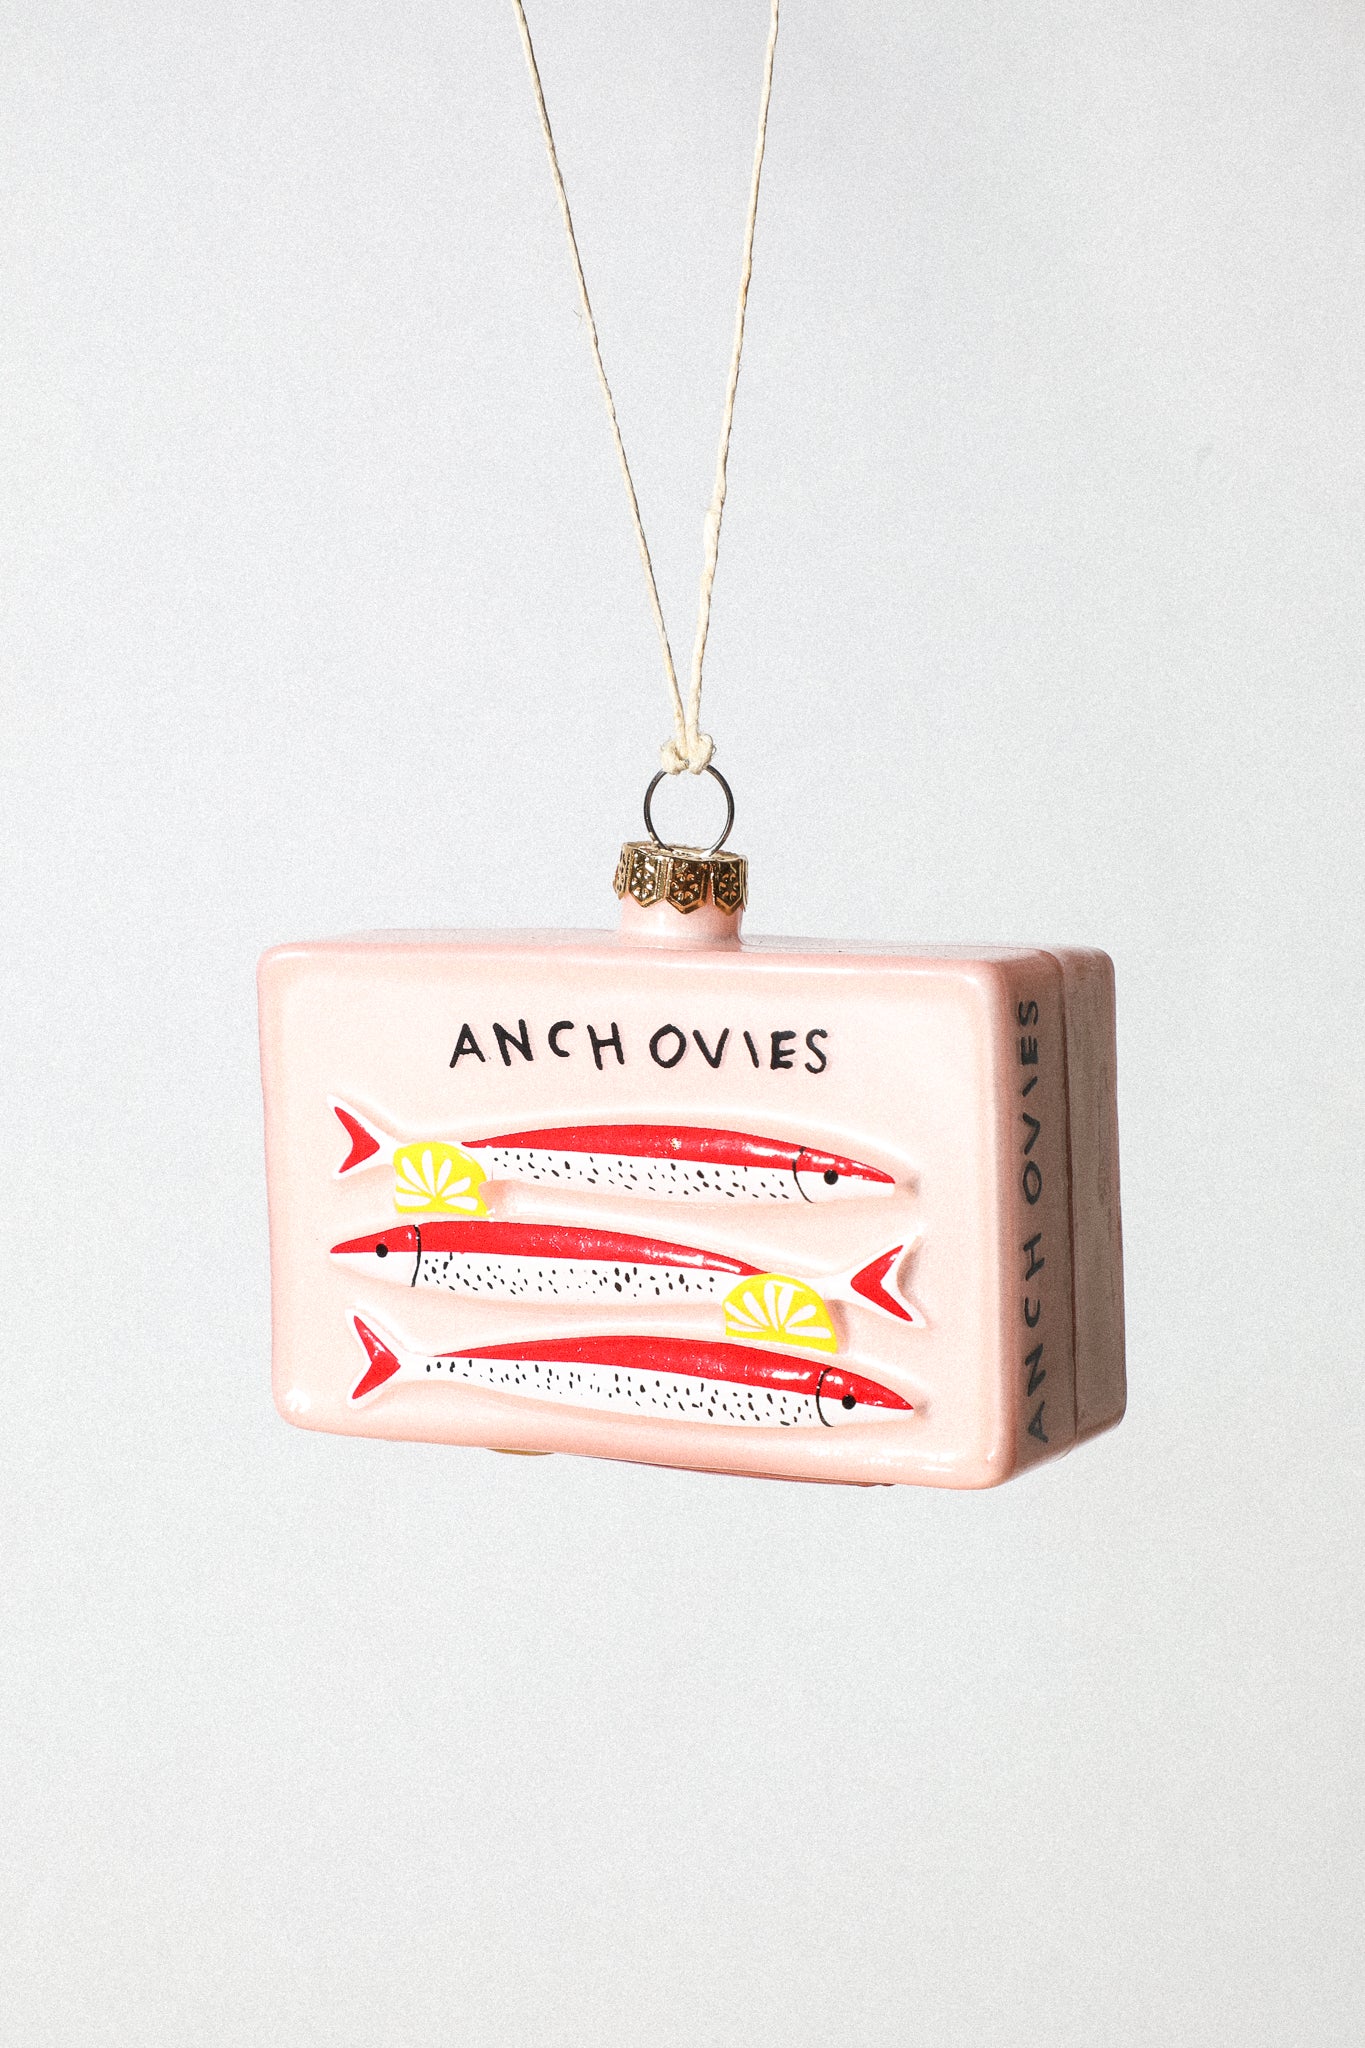 Anchovy Tin Ornament